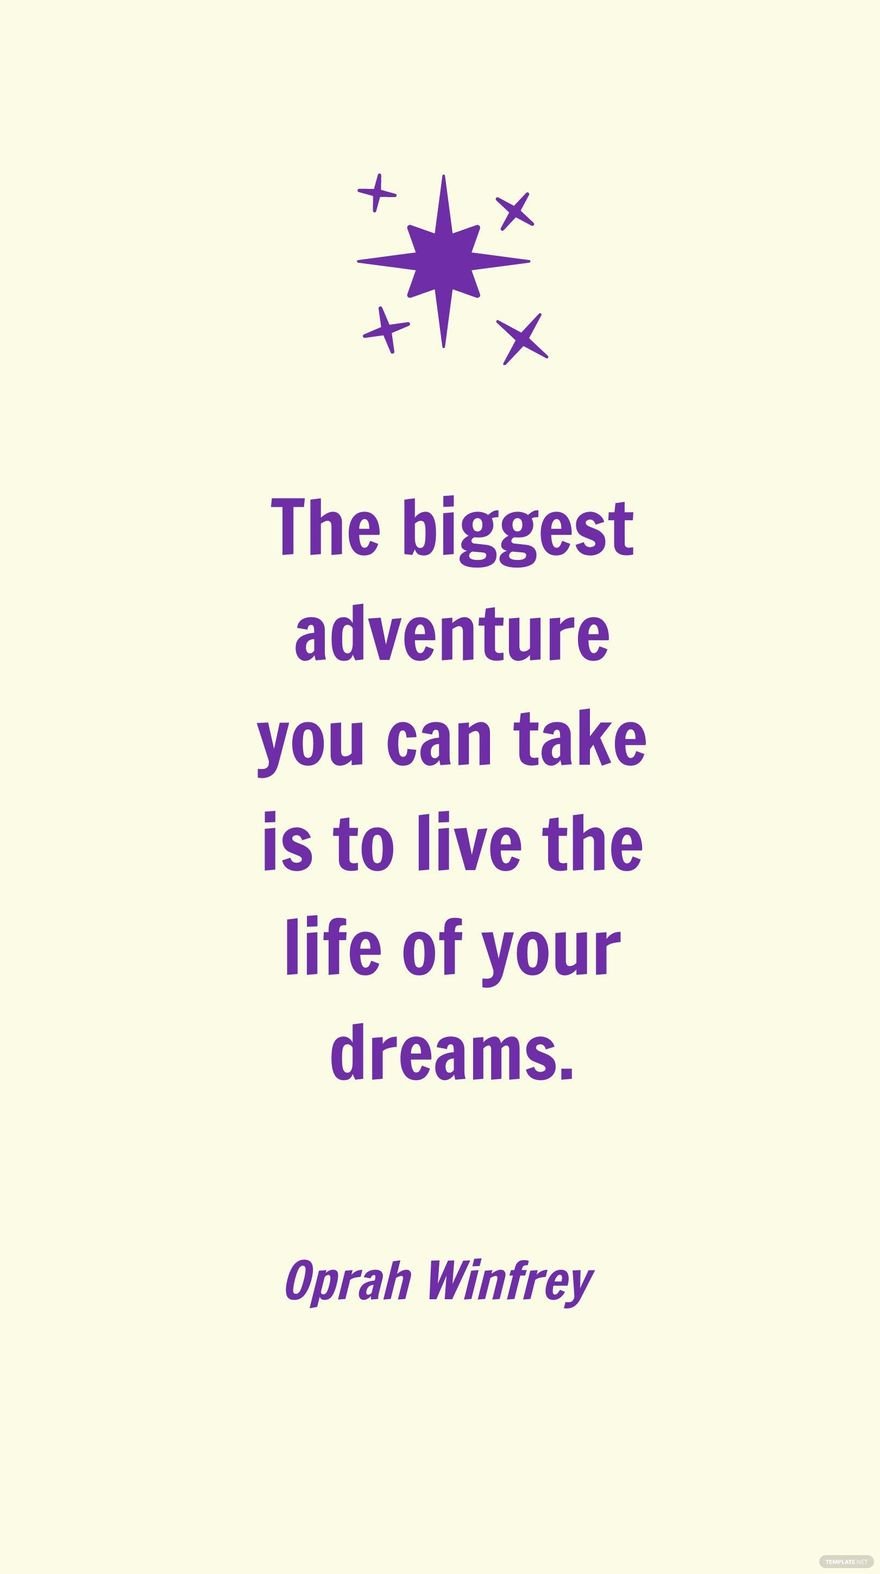 Oprah Winfrey - The biggest adventure you can take is to live the life of your dreams.